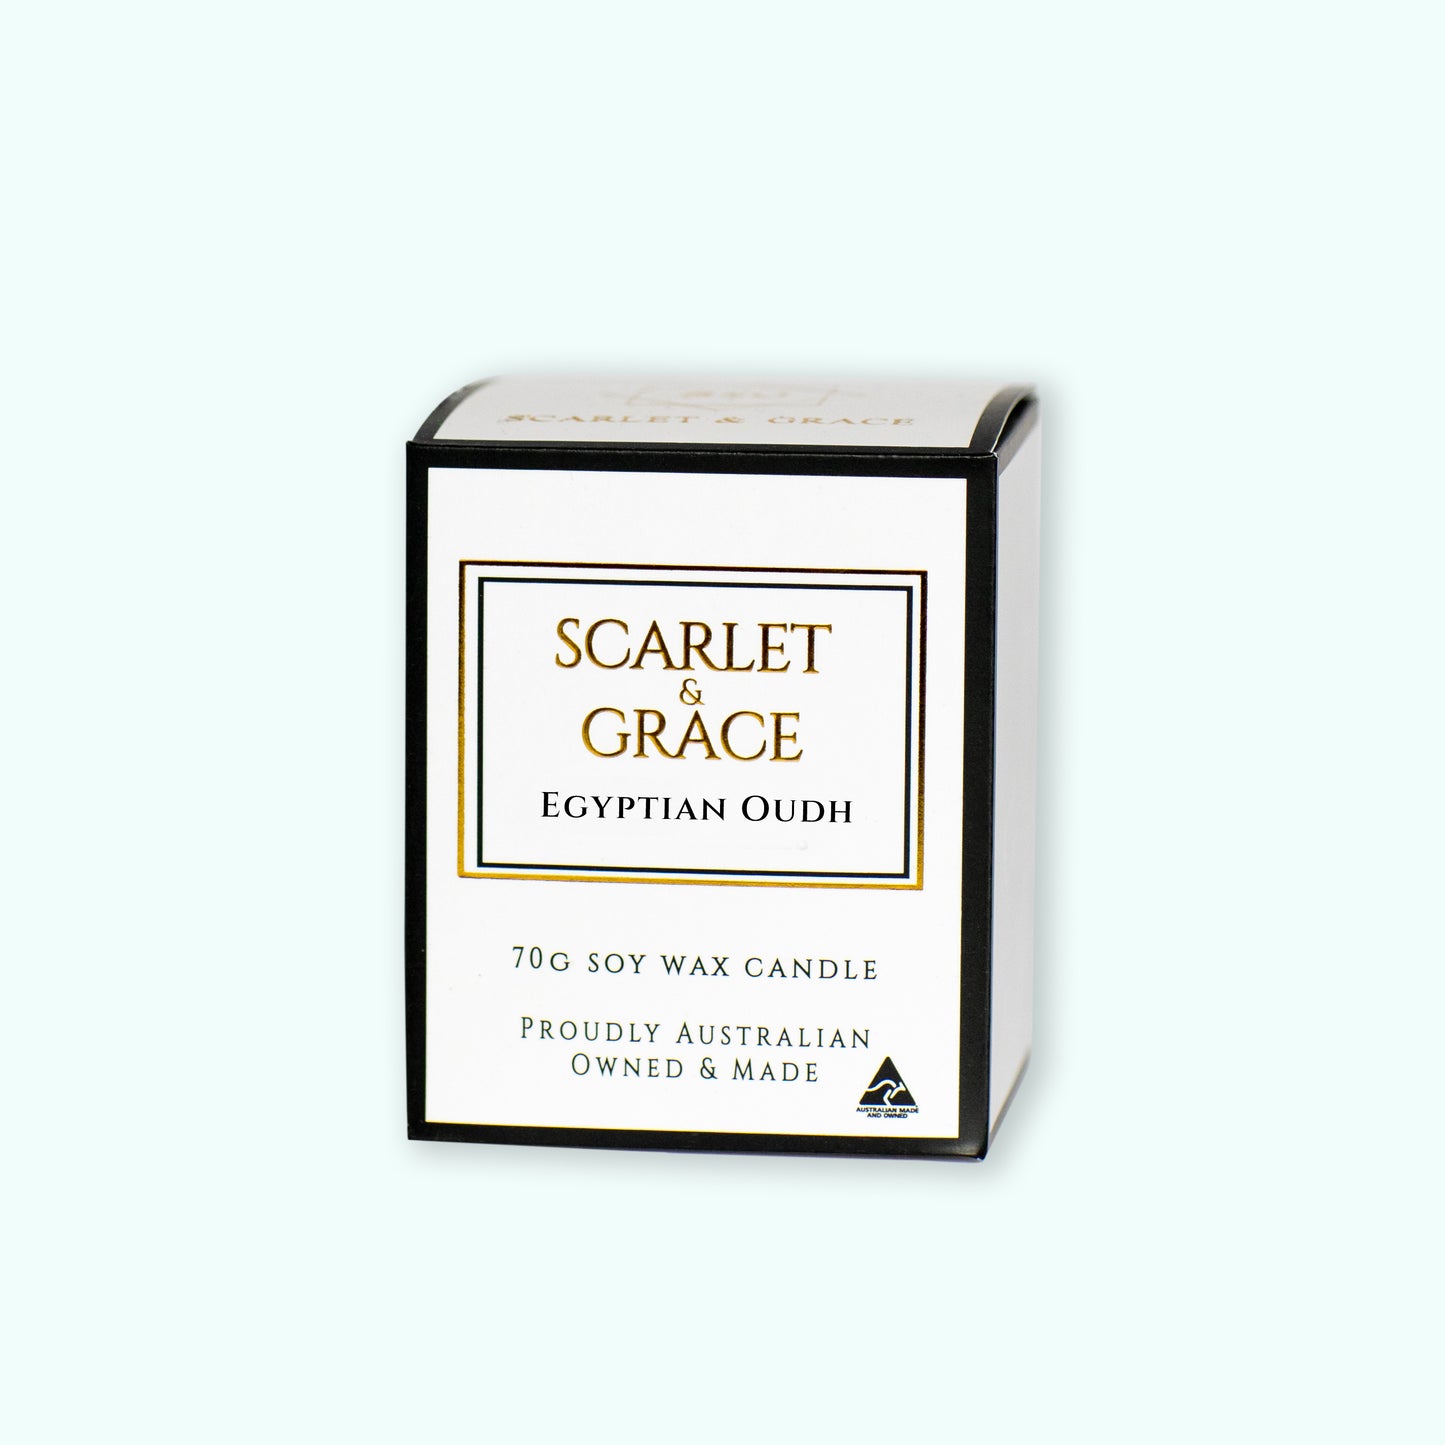 Egyptian Oudh - 70gm Soy Wax Candle - Scarlet & Grace